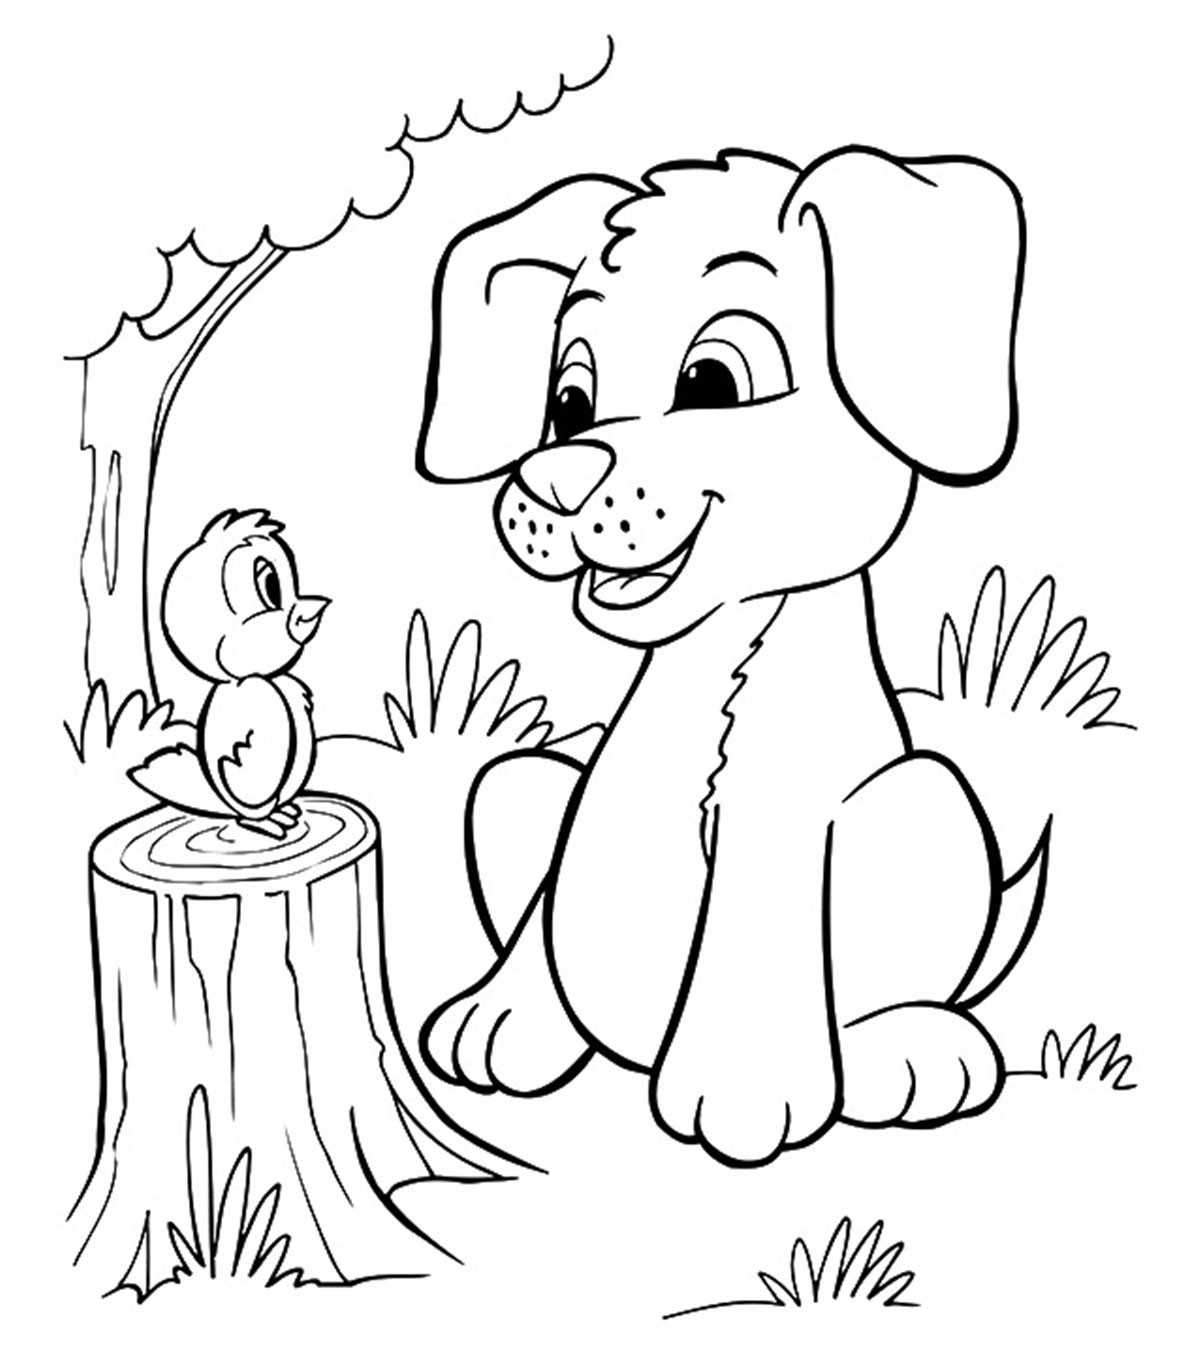 Baby Dog Coloring Pages
 Animal Coloring Pages MomJunction